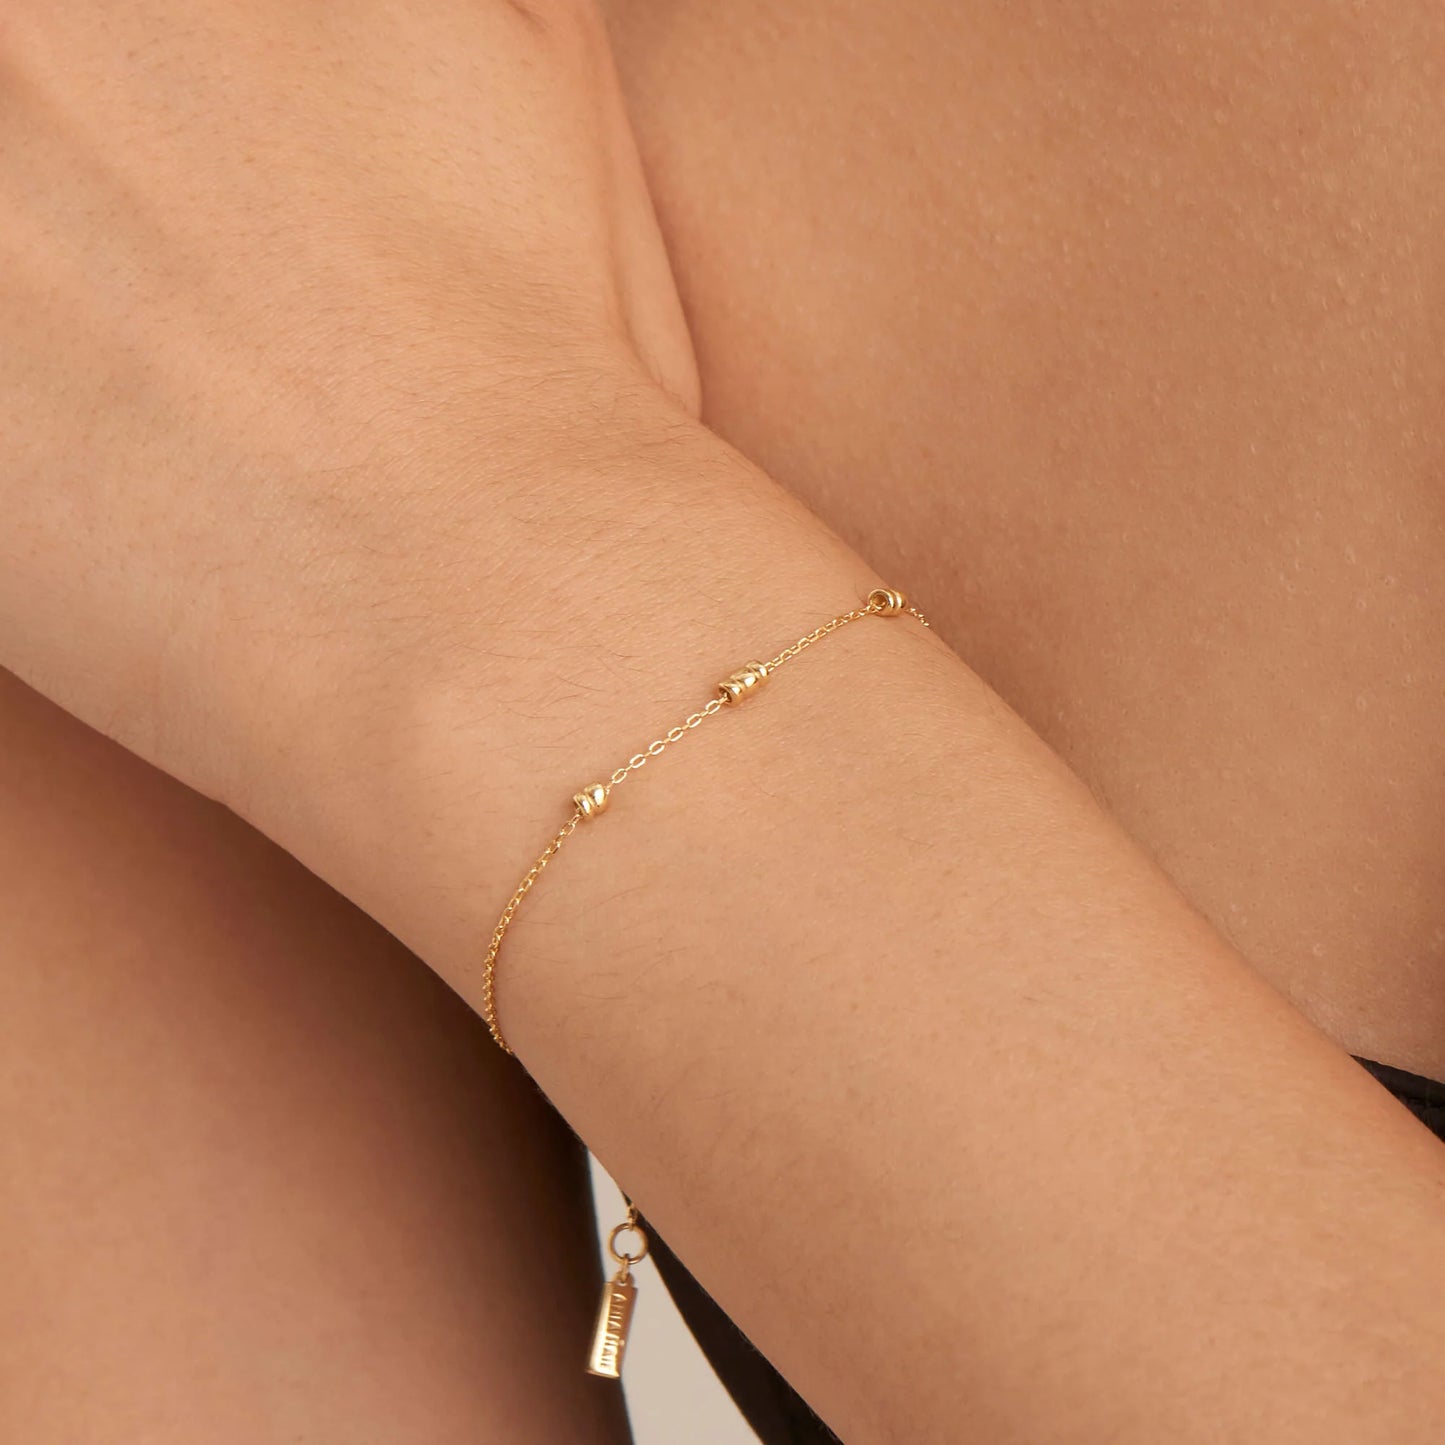 Ania Haie Yellow Gold Plated Smooth Twist Bracelet